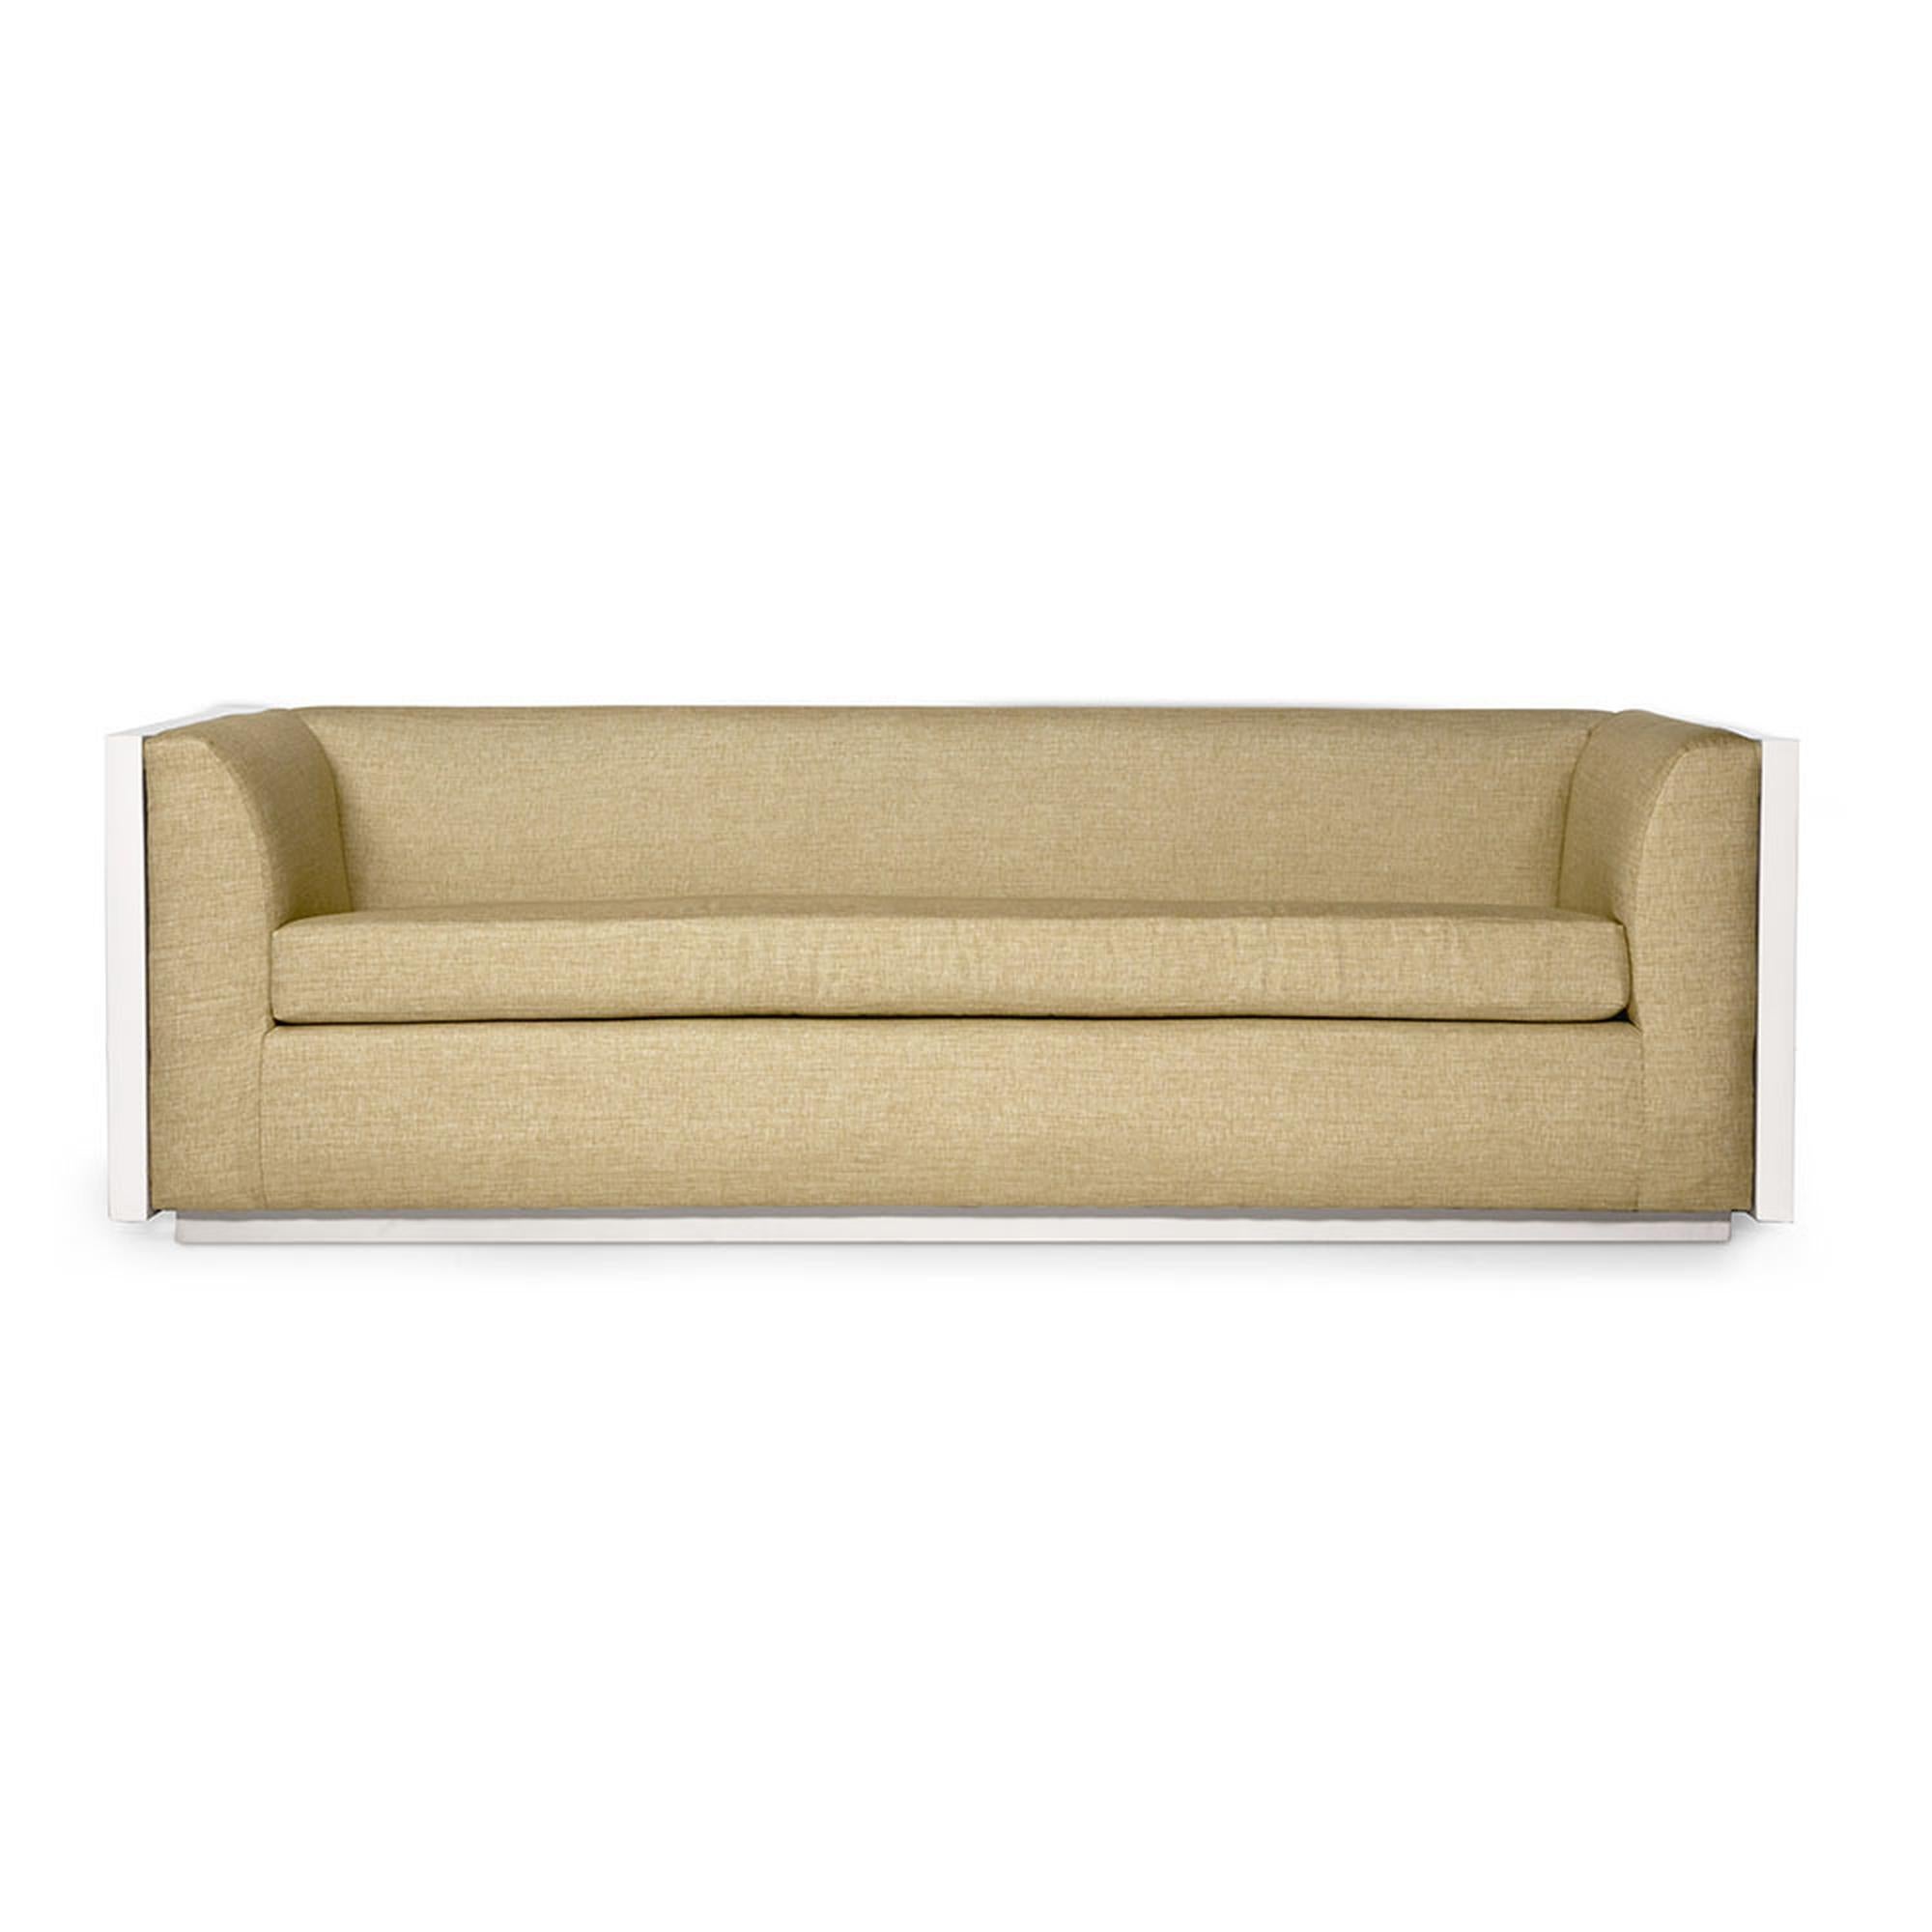 The Monterey sofa is luxurious, modern, and chic. With the combination of ease and style, this sofa is constructed with eight-way hand tied springs and a down-wrapped foam seat to ensure durability, support, and comfort. With a sleek wood base,